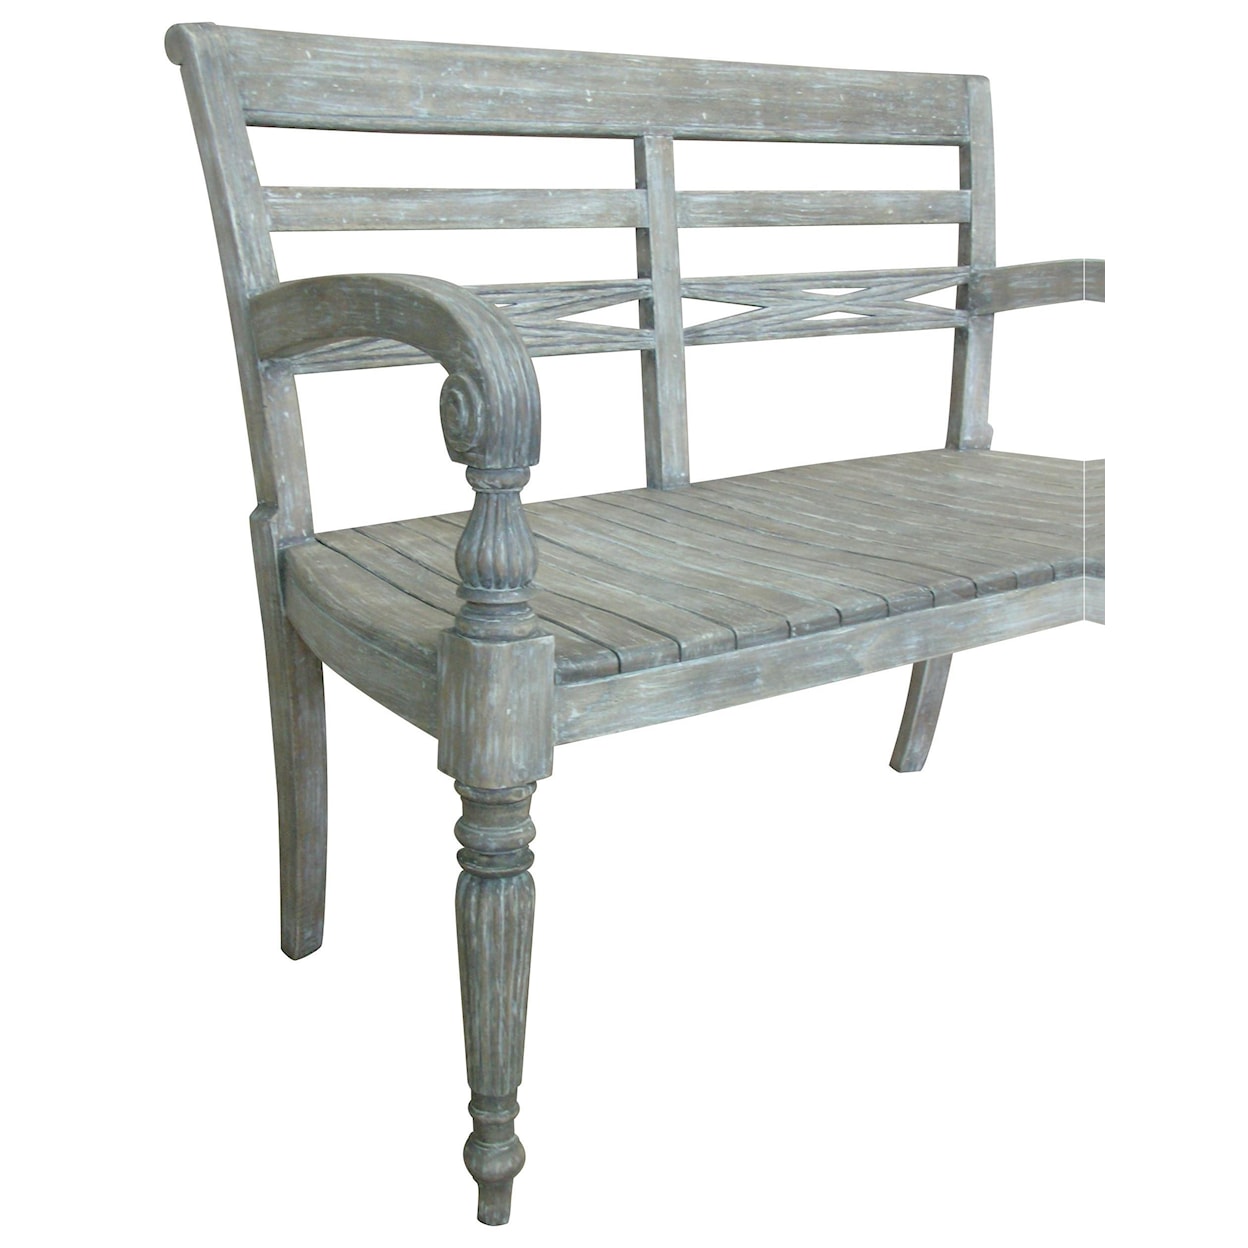 Trade Winds Furniture Accents and Accessories Raffles Bench